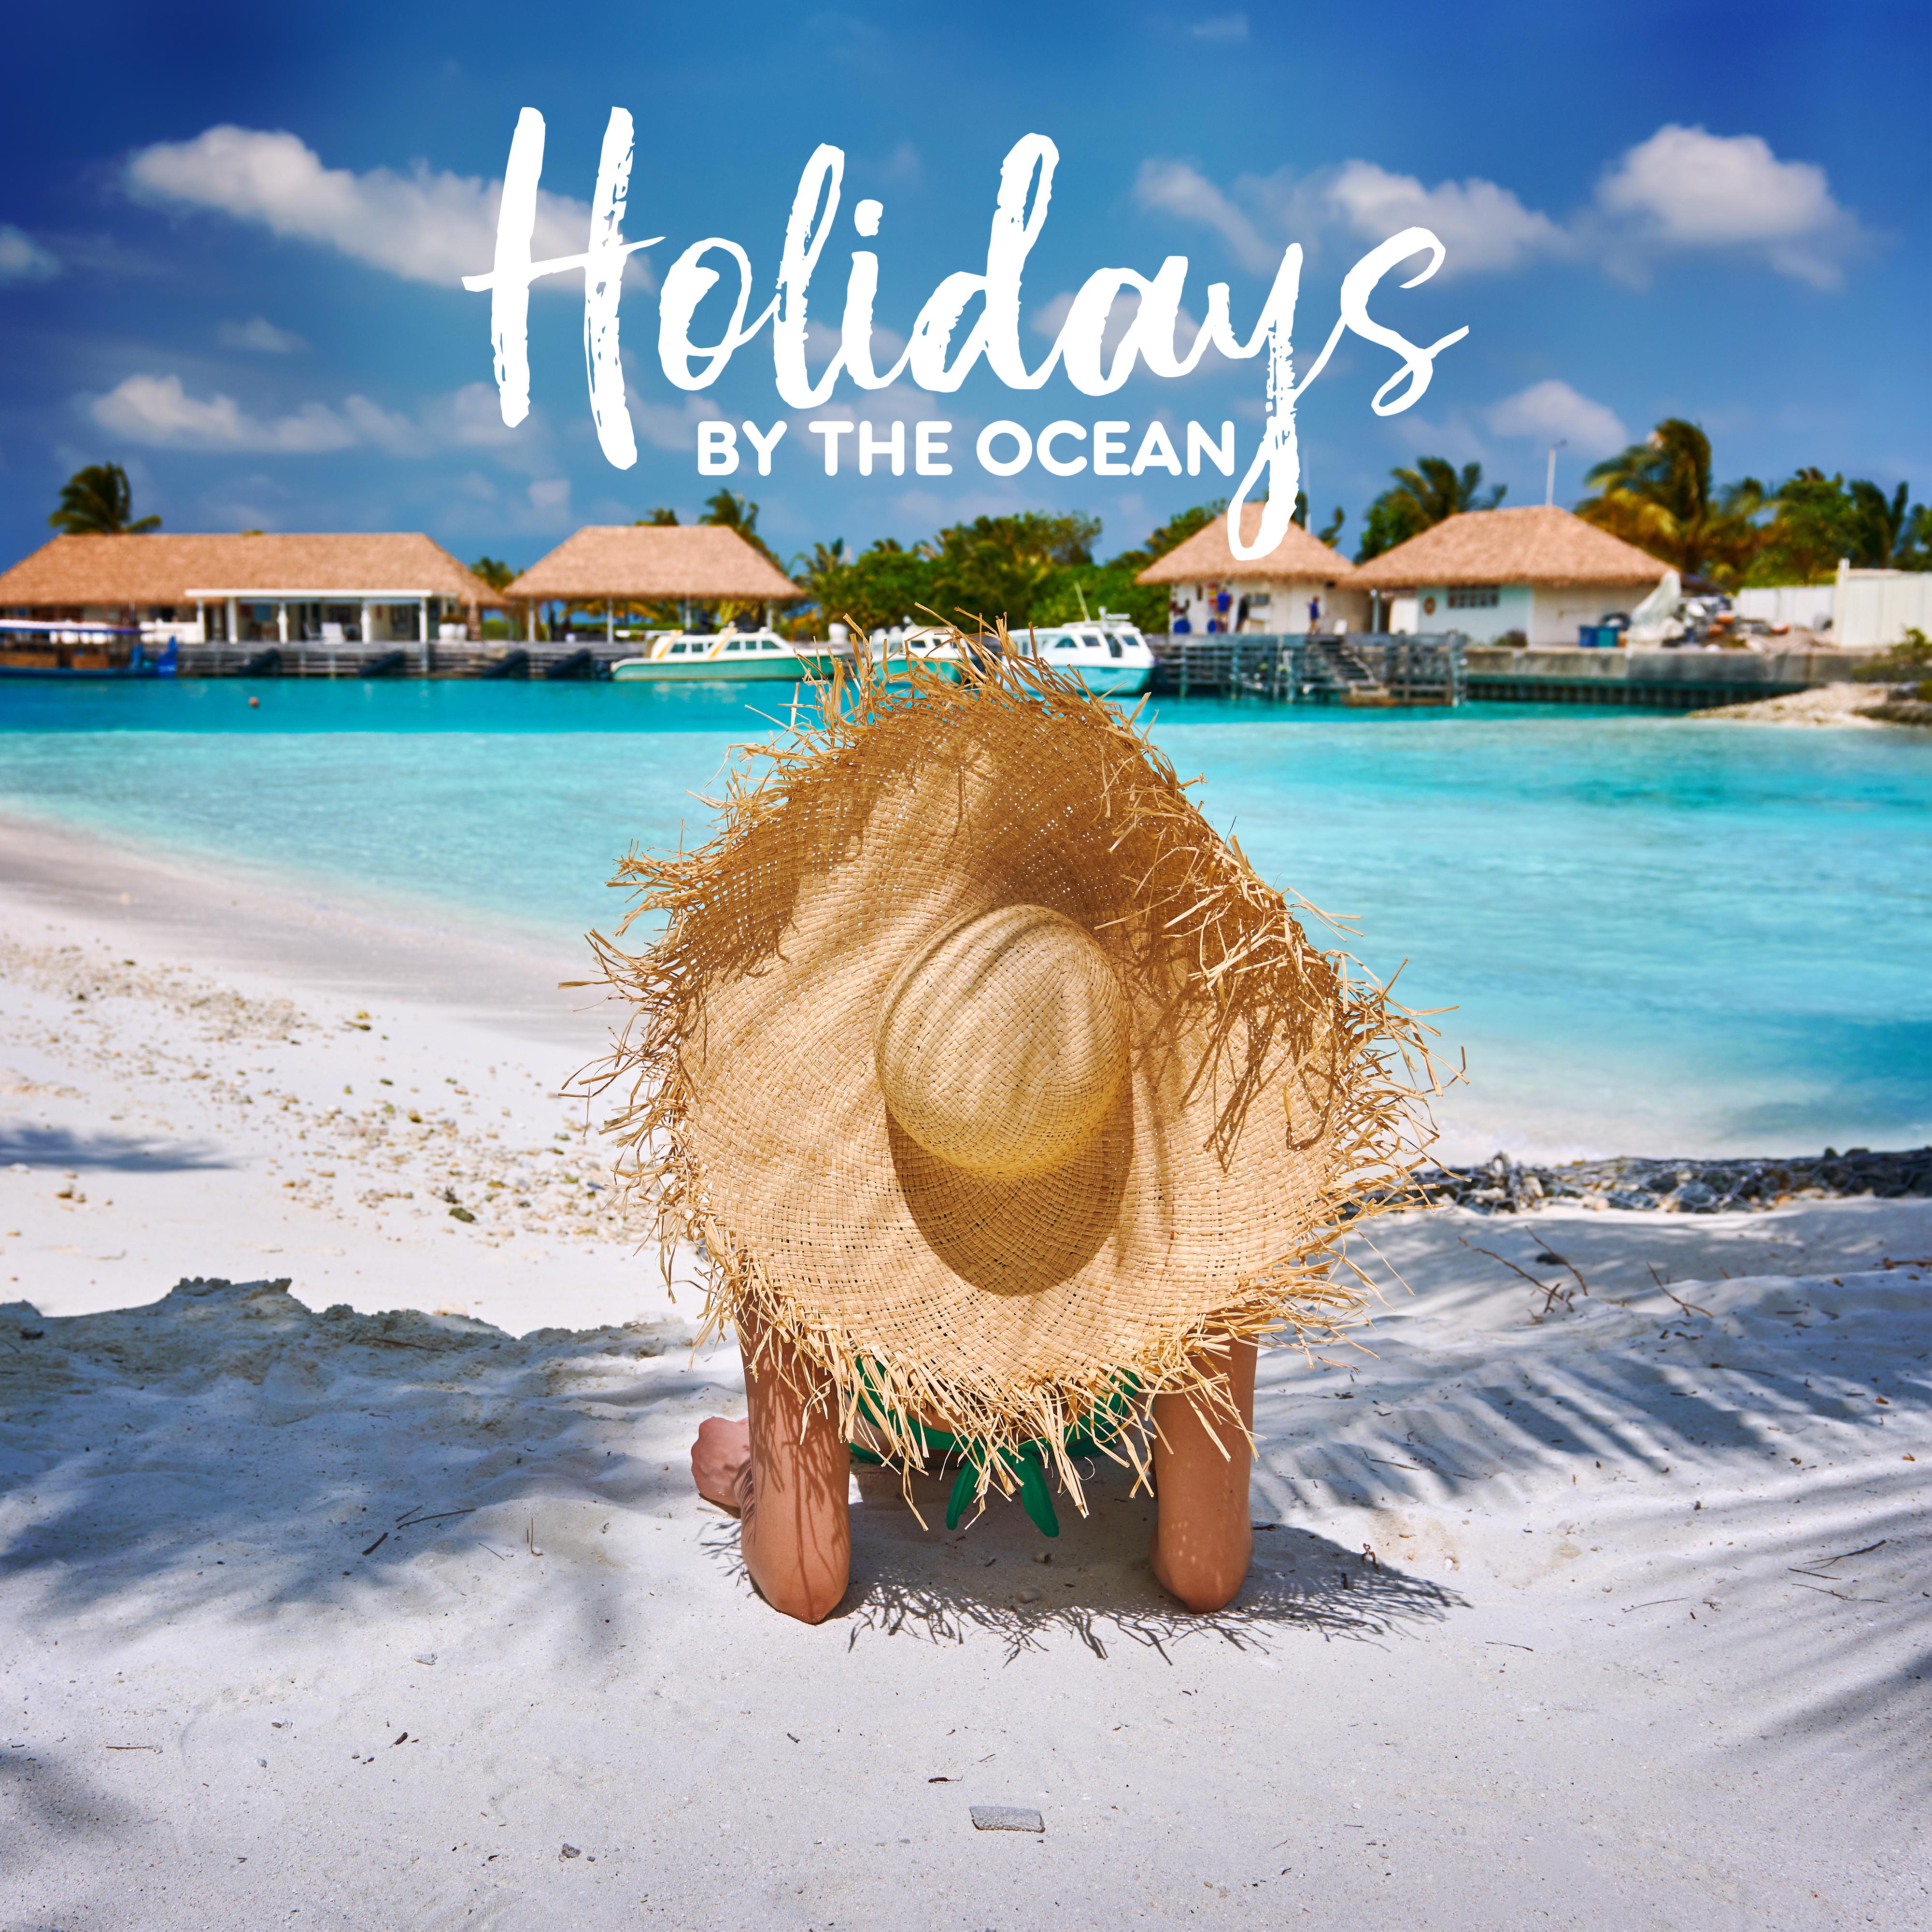 Holidays by the Ocean - Beach Holidays, Relax under Palm Trees, Drinks at the Bar, Party on Ibiza, Music after Dark, Chill Out and Rest with Chillout Music